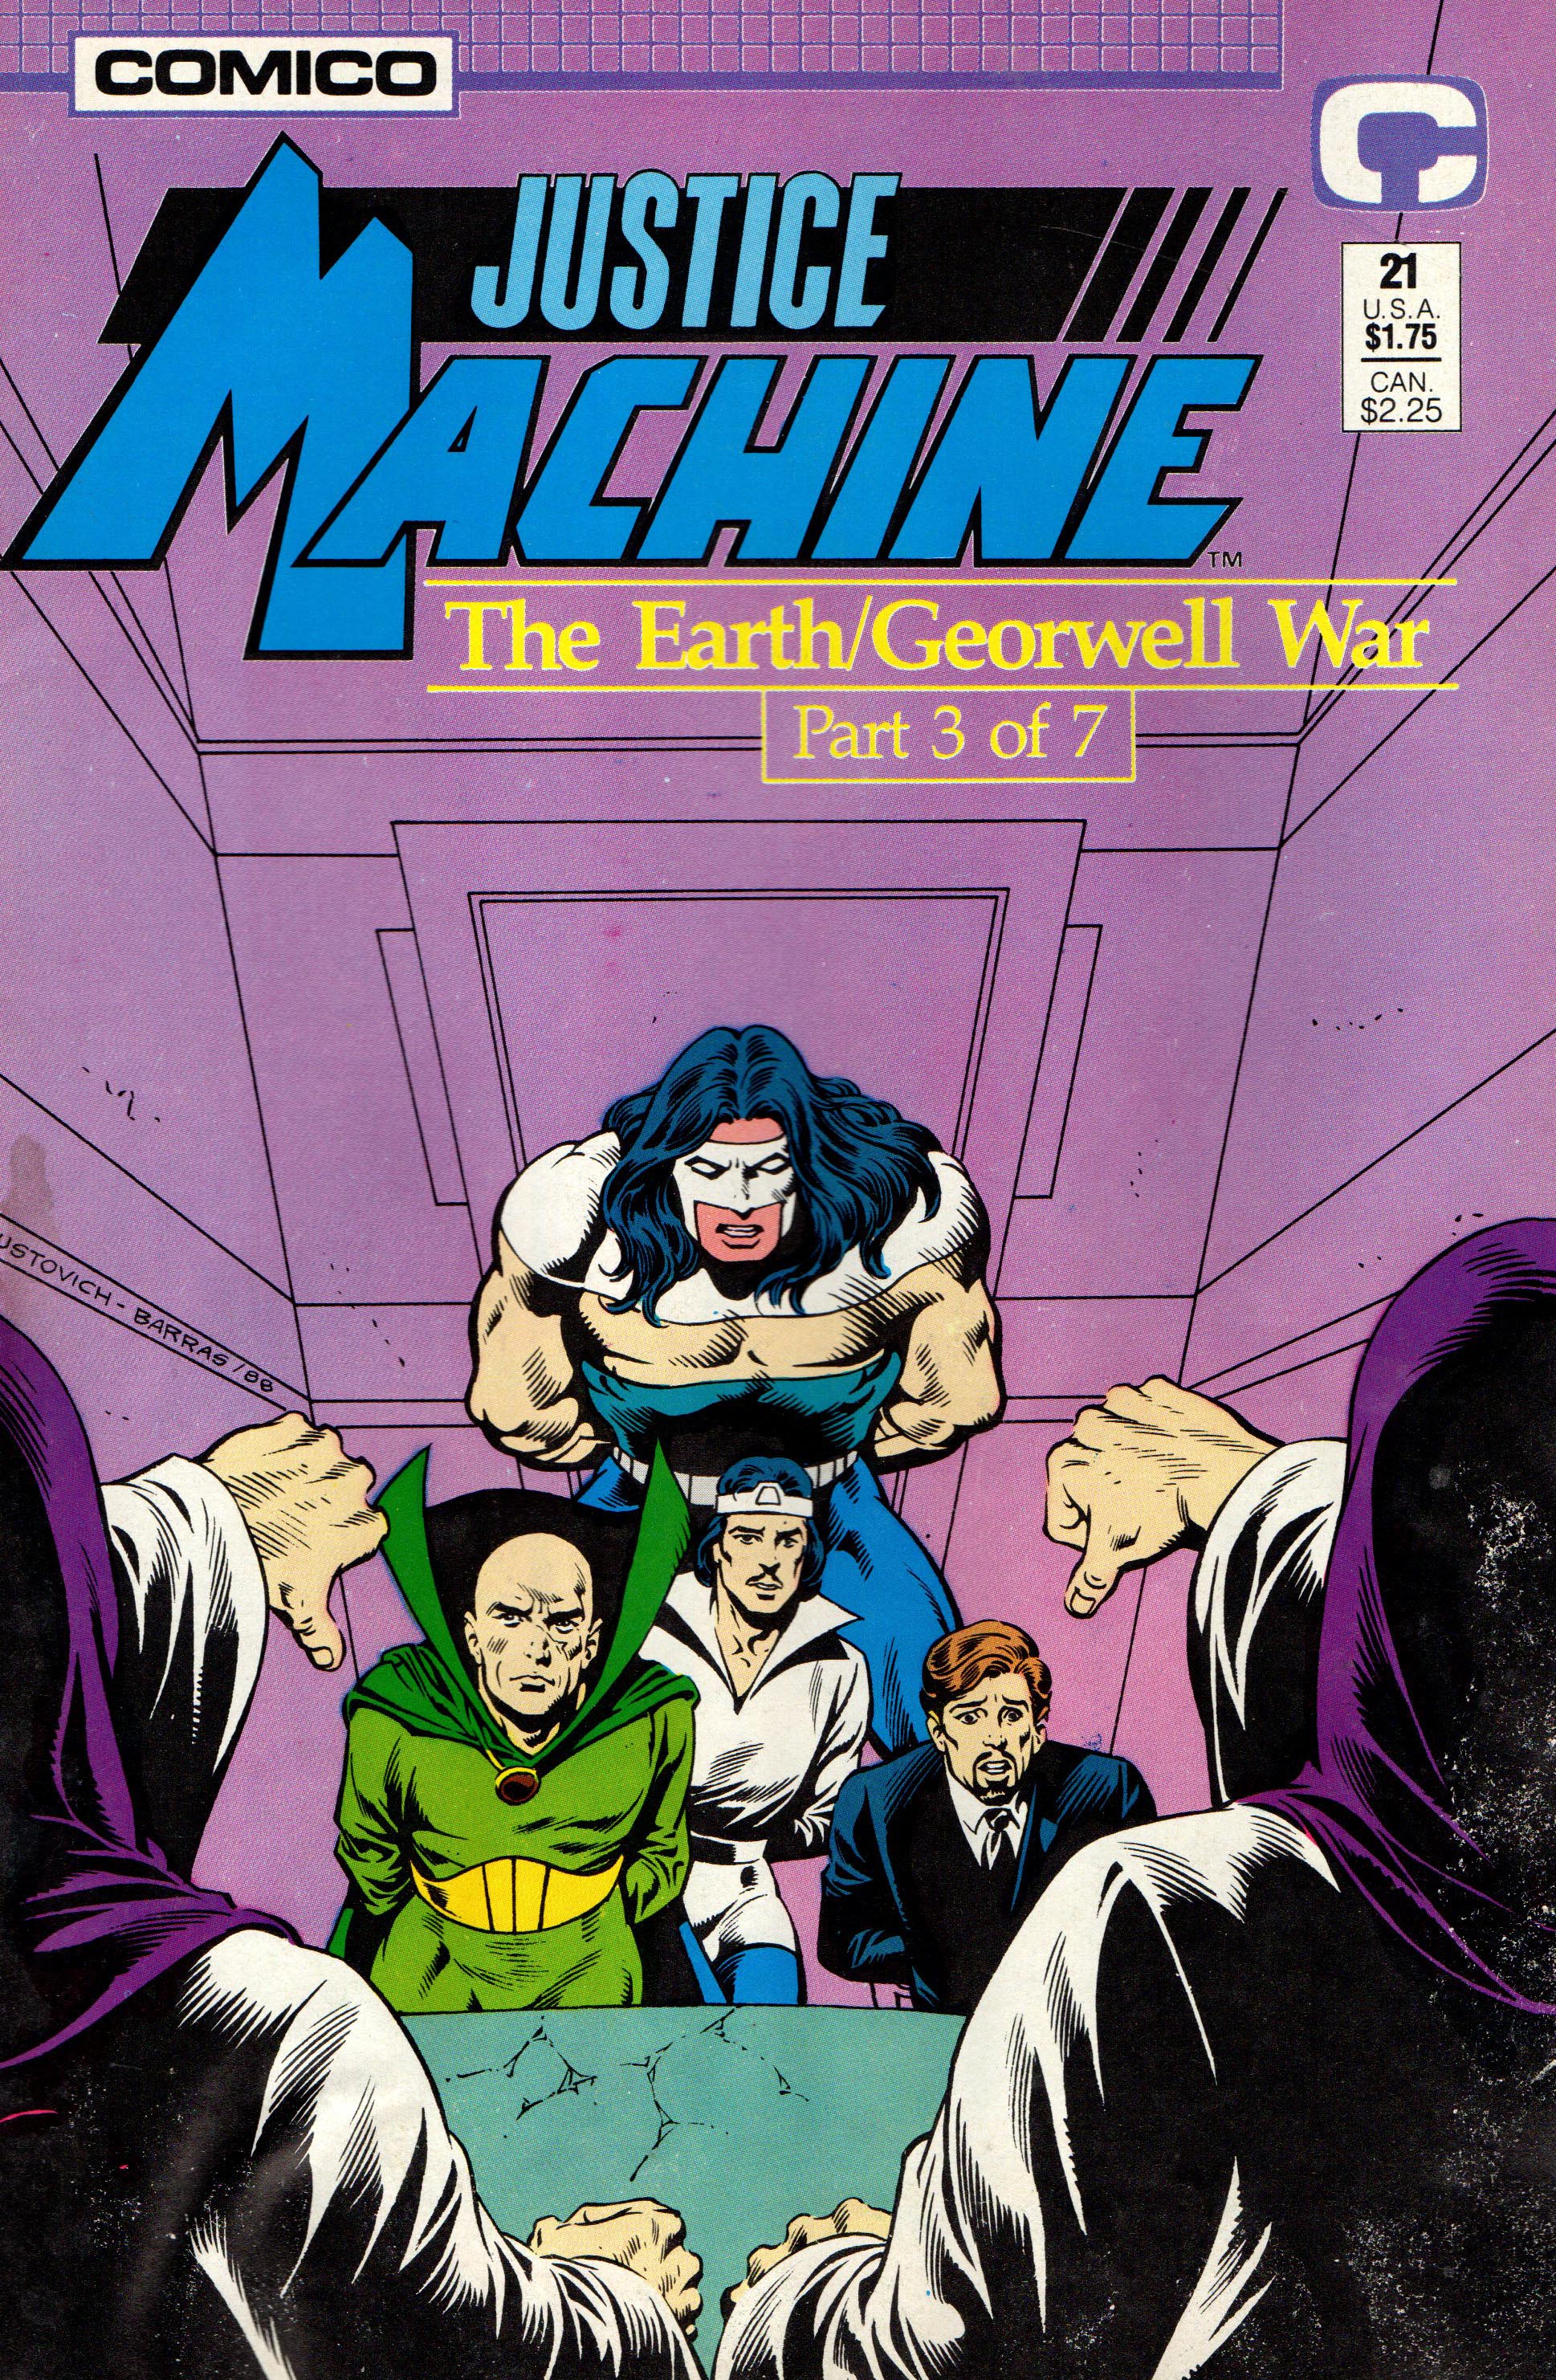 Read online Justice Machine comic -  Issue #21 - 1